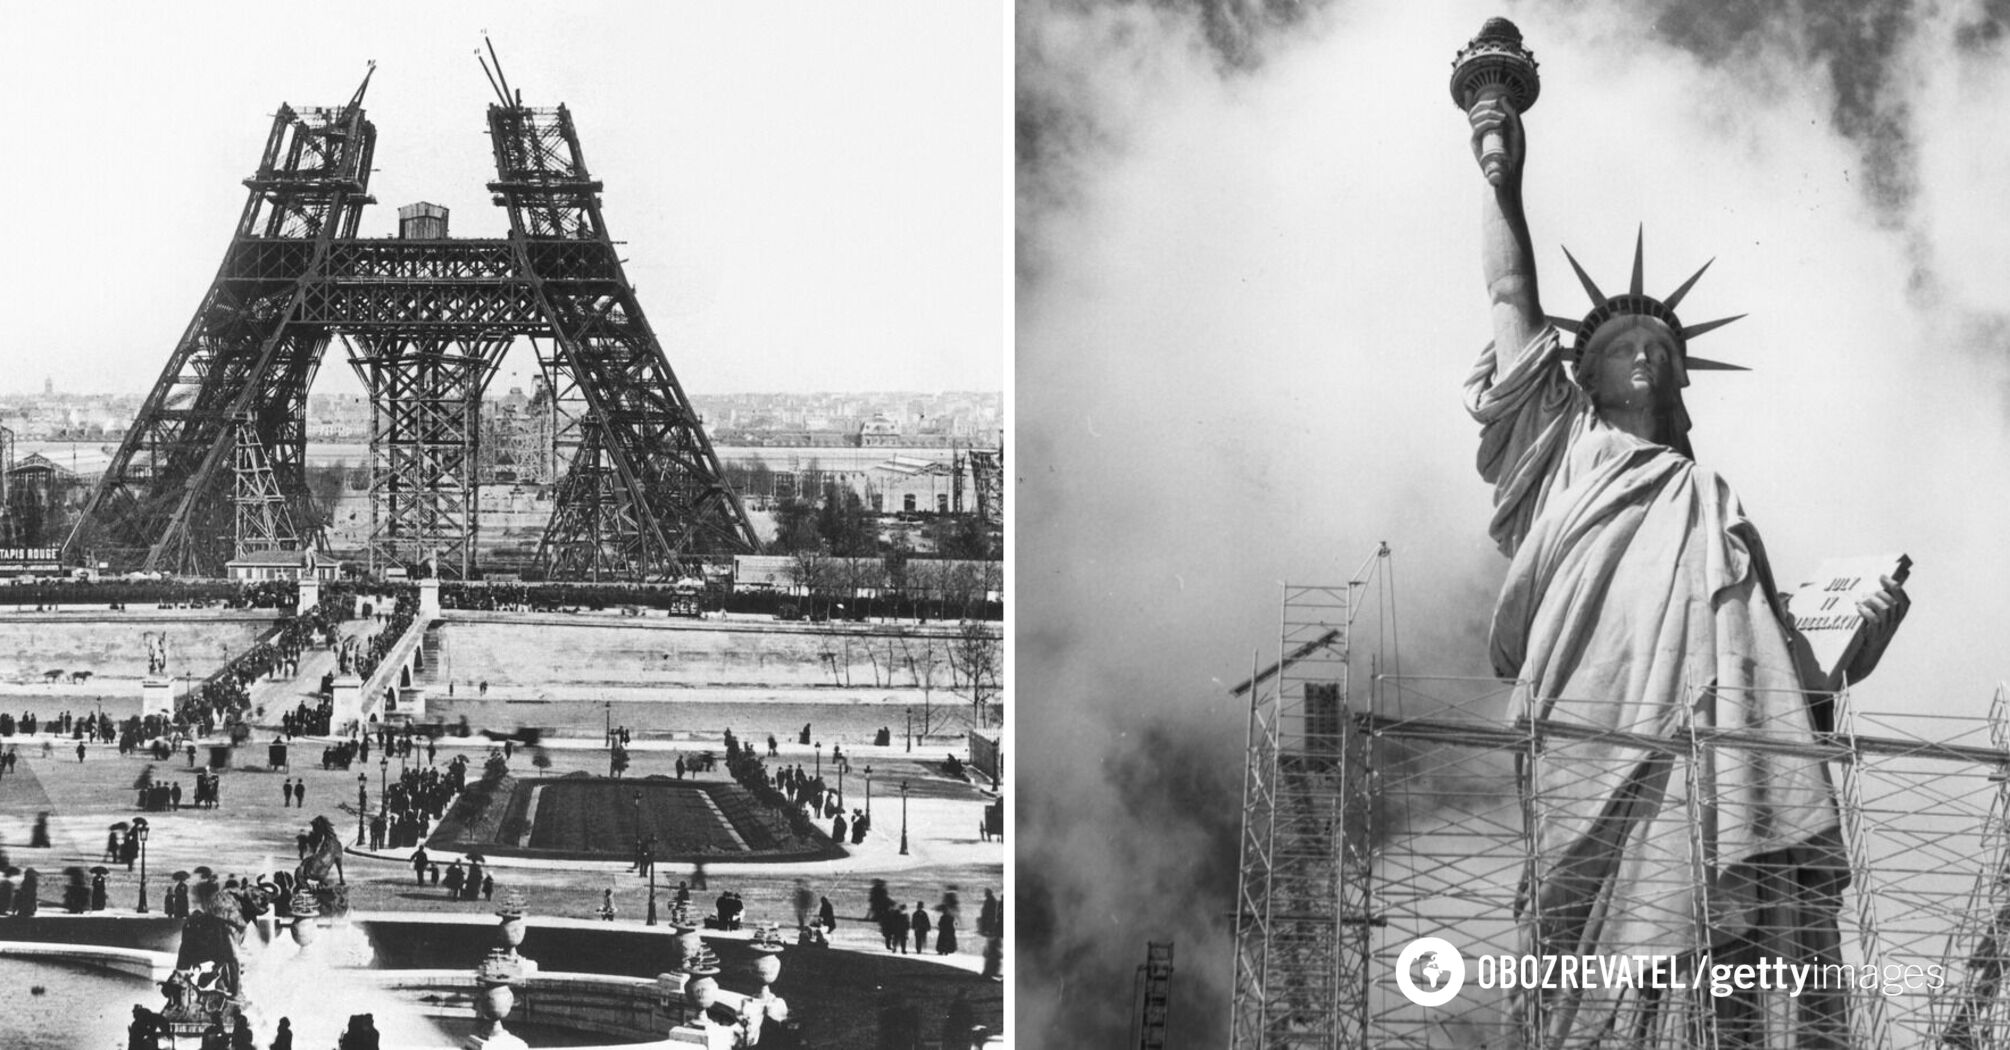 The Eiffel Tower, the Statue of Liberty and others: what the world's most popular monuments looked like during the construction phase. Photo